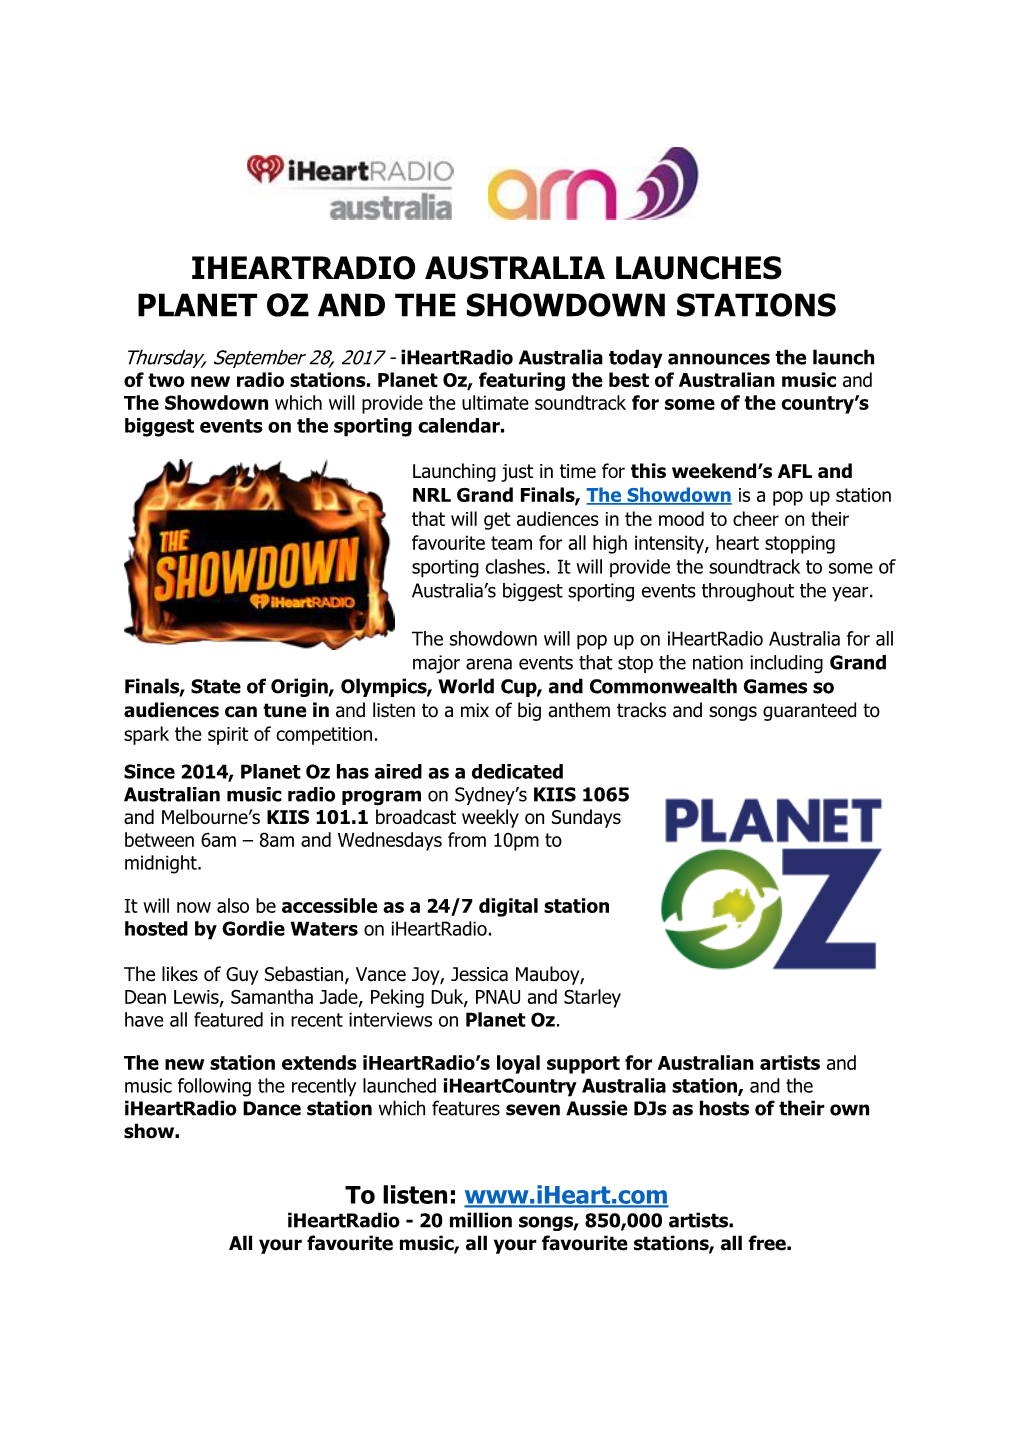 Iheartradio Australia Launches Planet Oz and the Showdown Stations